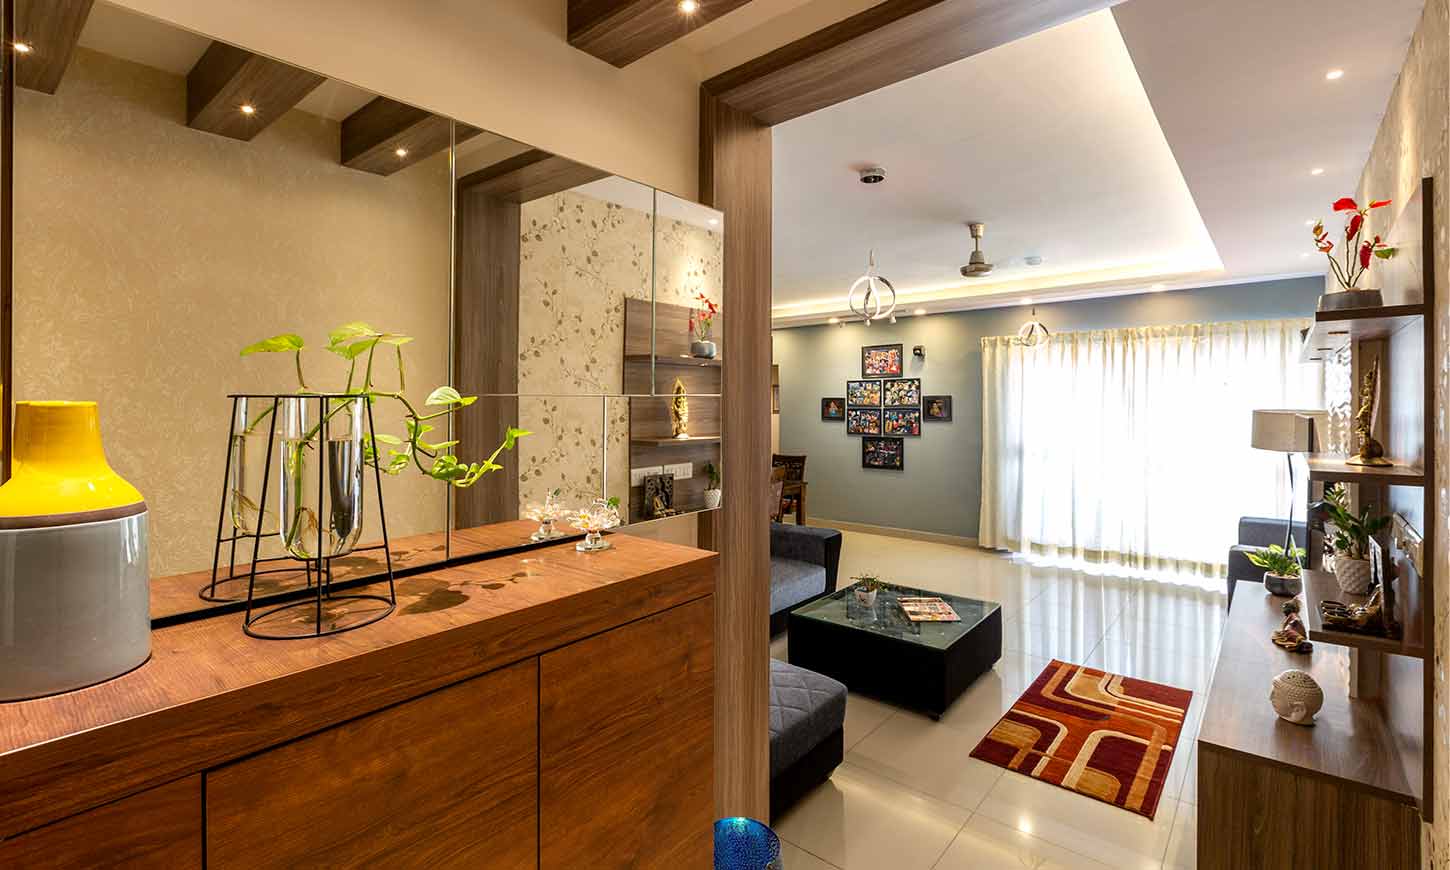 Living room with open kitchen with good interiors in bangalore